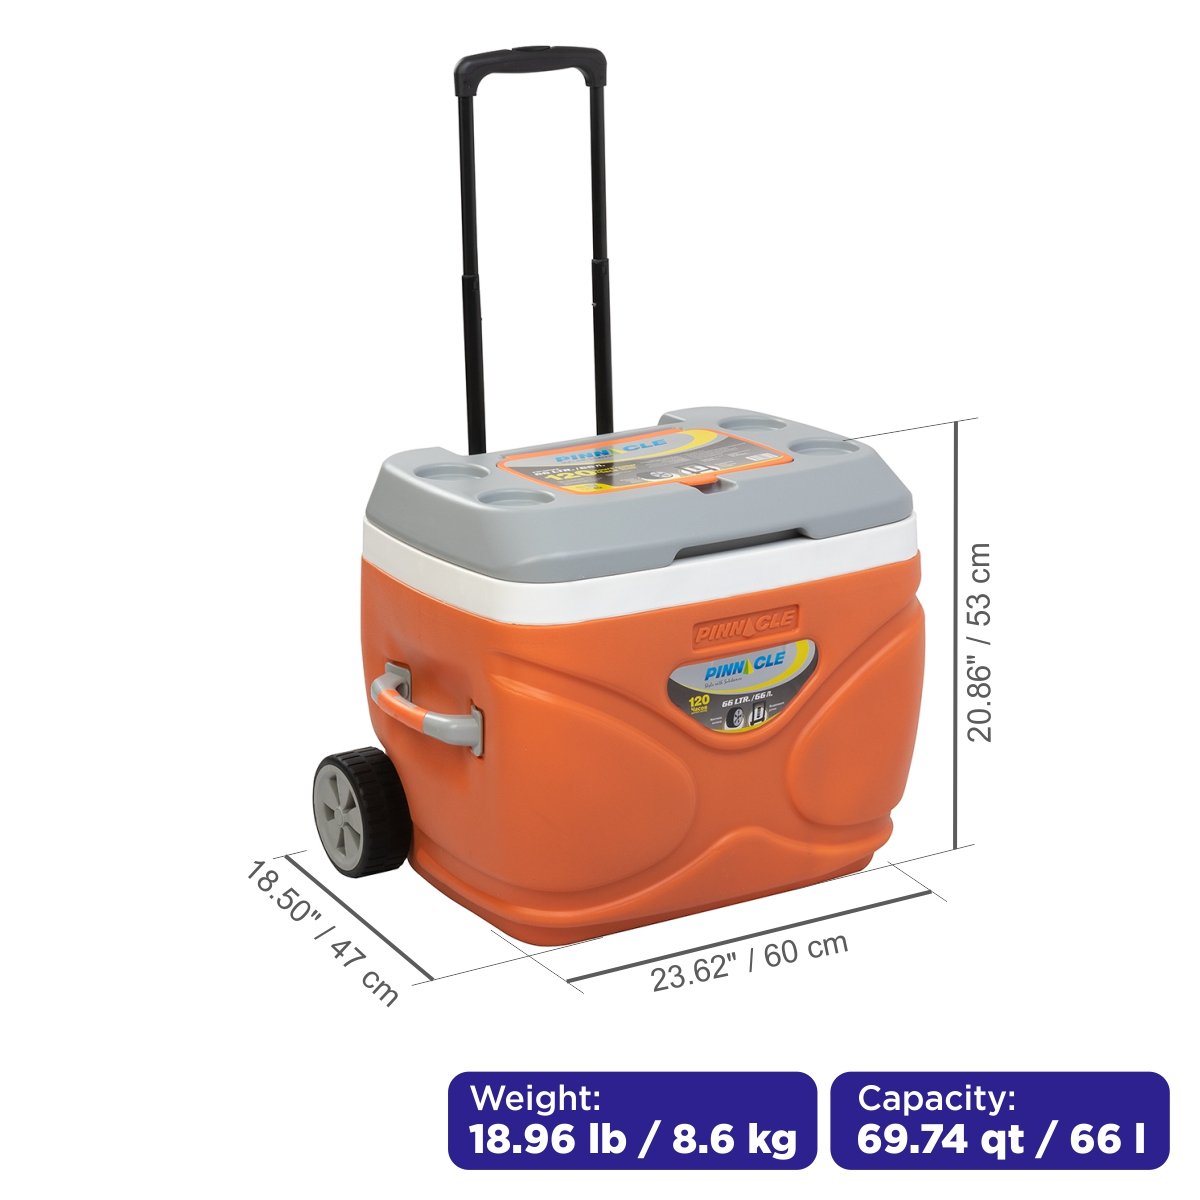 Prudence Wheeling Ice Chest with Retractable Handle, 69 qt, Orange weighs 19 lbs, 19 inches long, 23.6 inches high and 18.5 inches wide